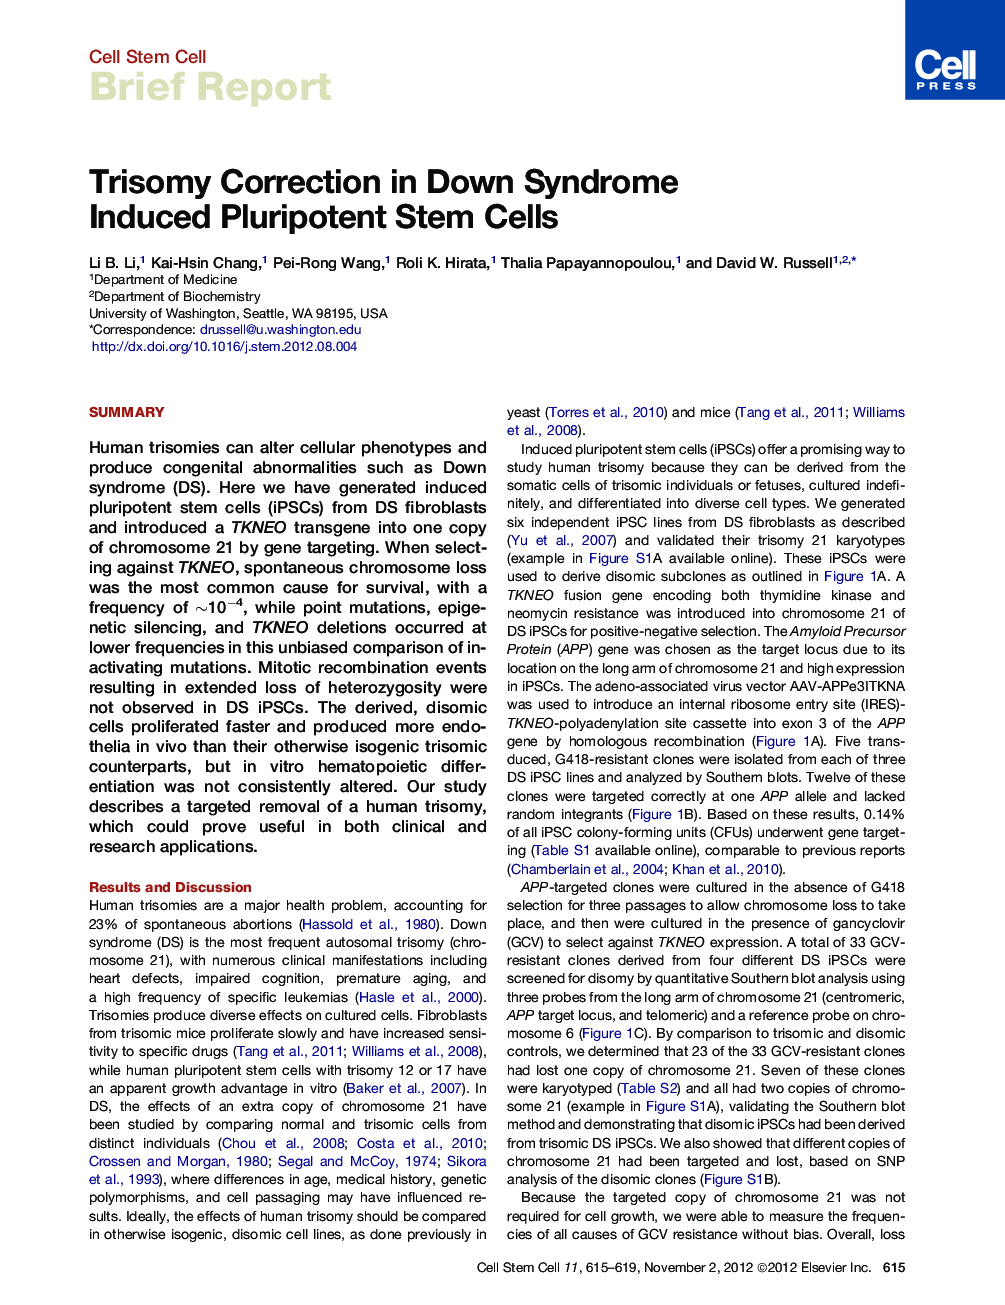 Trisomy Correction in Down Syndrome Induced Pluripotent Stem Cells